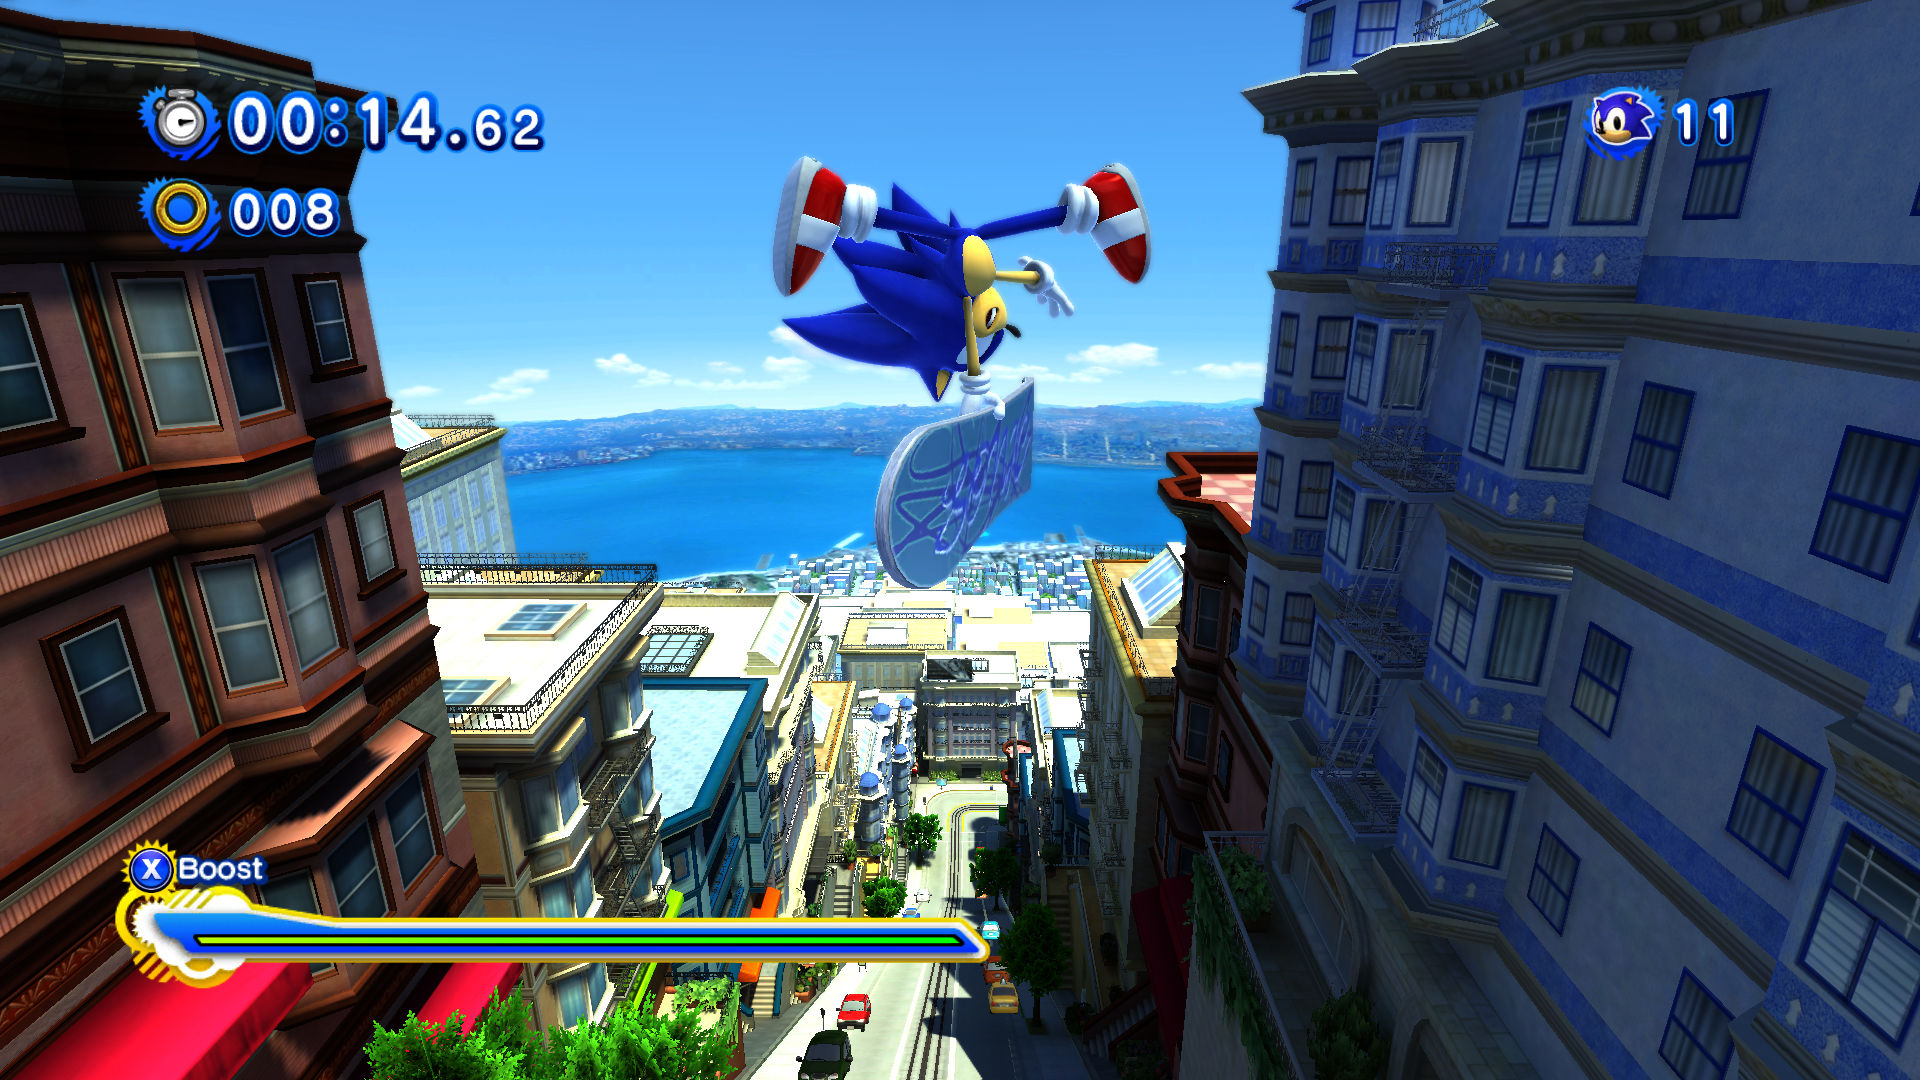 Save 60% on Sonic Frontiers on Steam